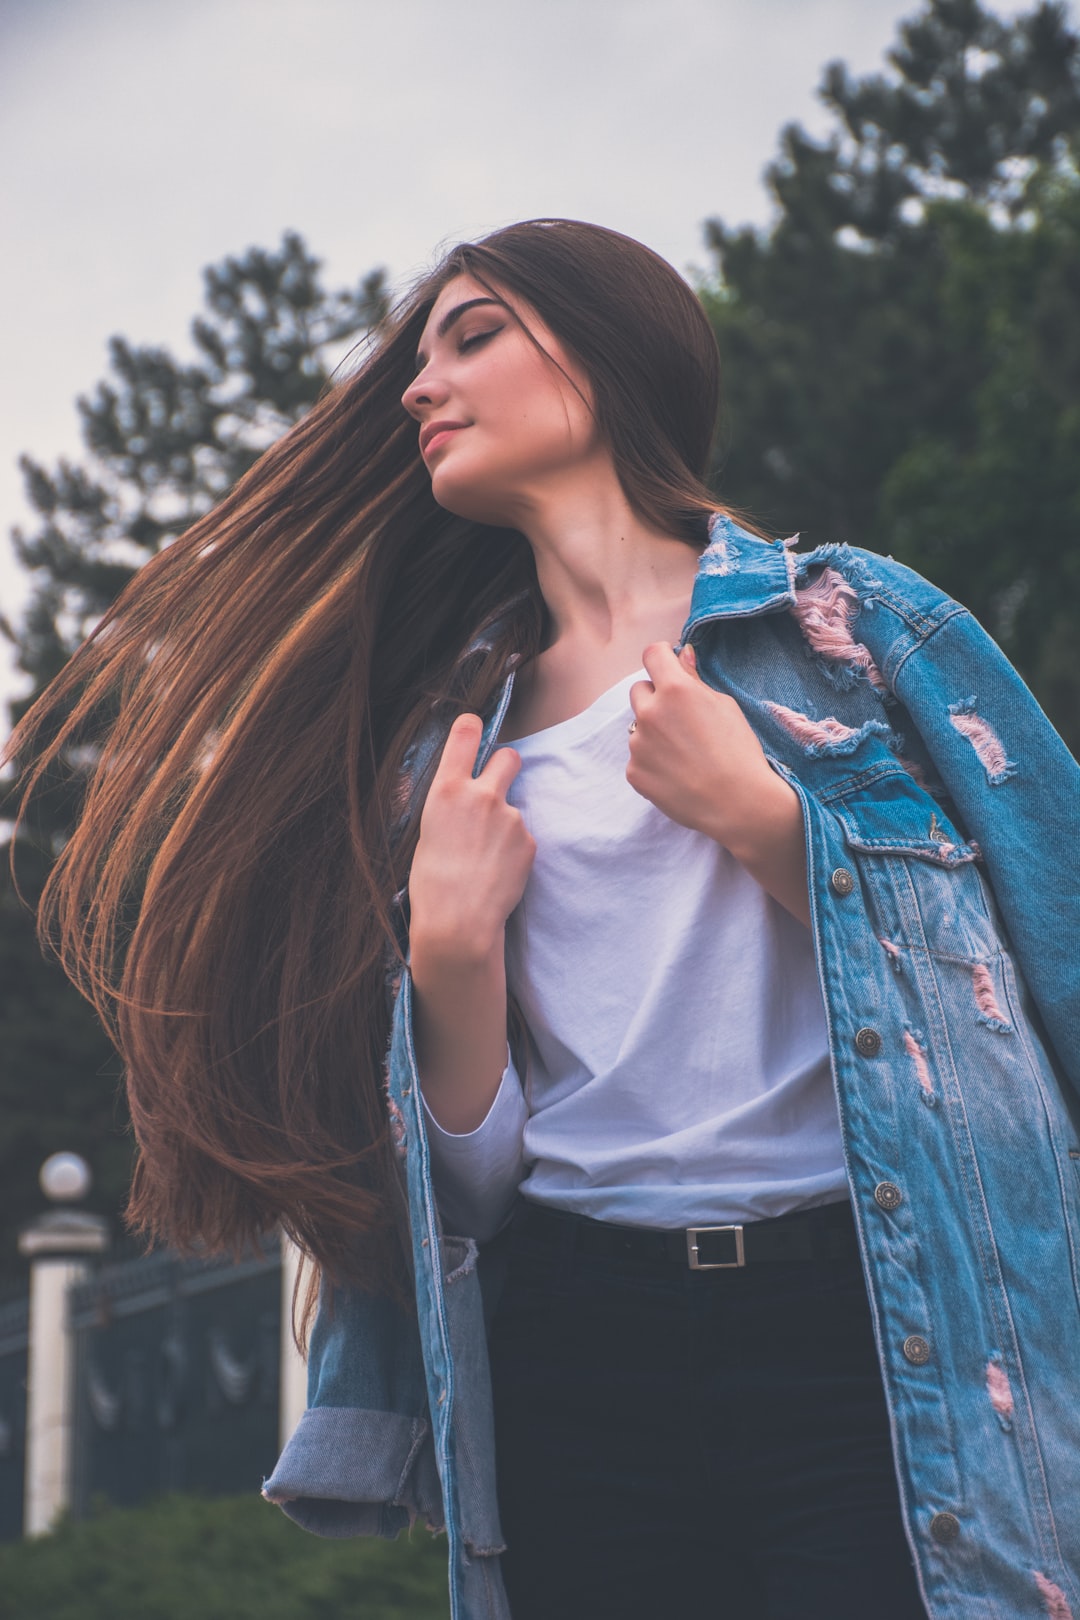 500+ Long Hair Pictures | Download Free Images on Unsplash